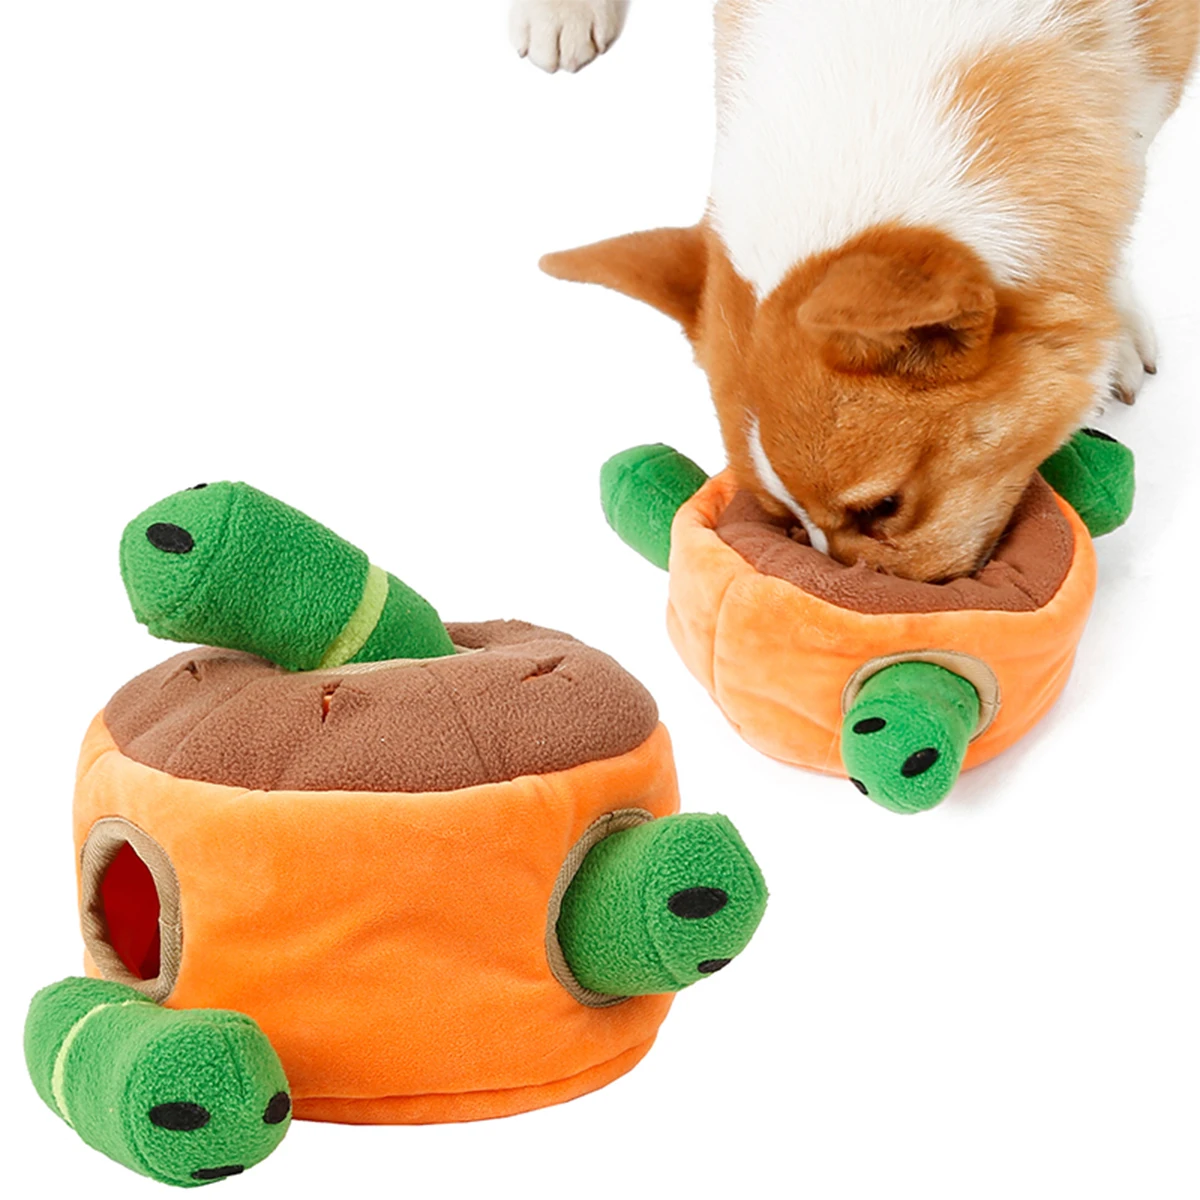 

Interactive Puzzle Toy for Dogs,Hide and Seek Dog Puzzle Puppy Toys, Squeaky Plush Dog Puzzles